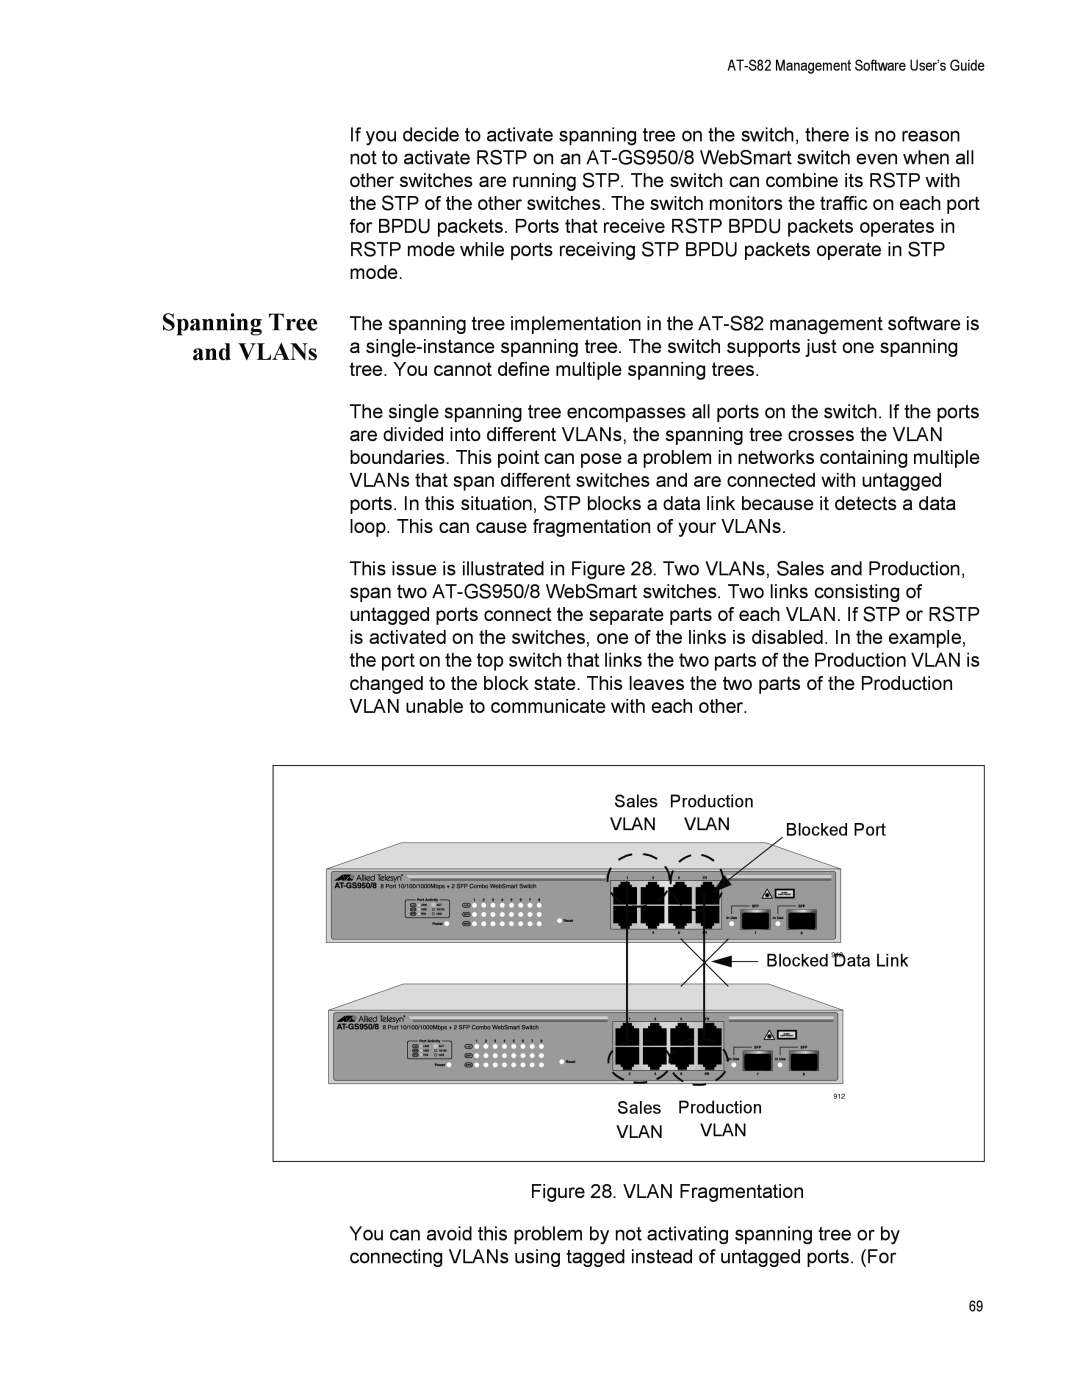 Allied Telesis AT-GS950/8 manual Spanning Tree and VLANs 